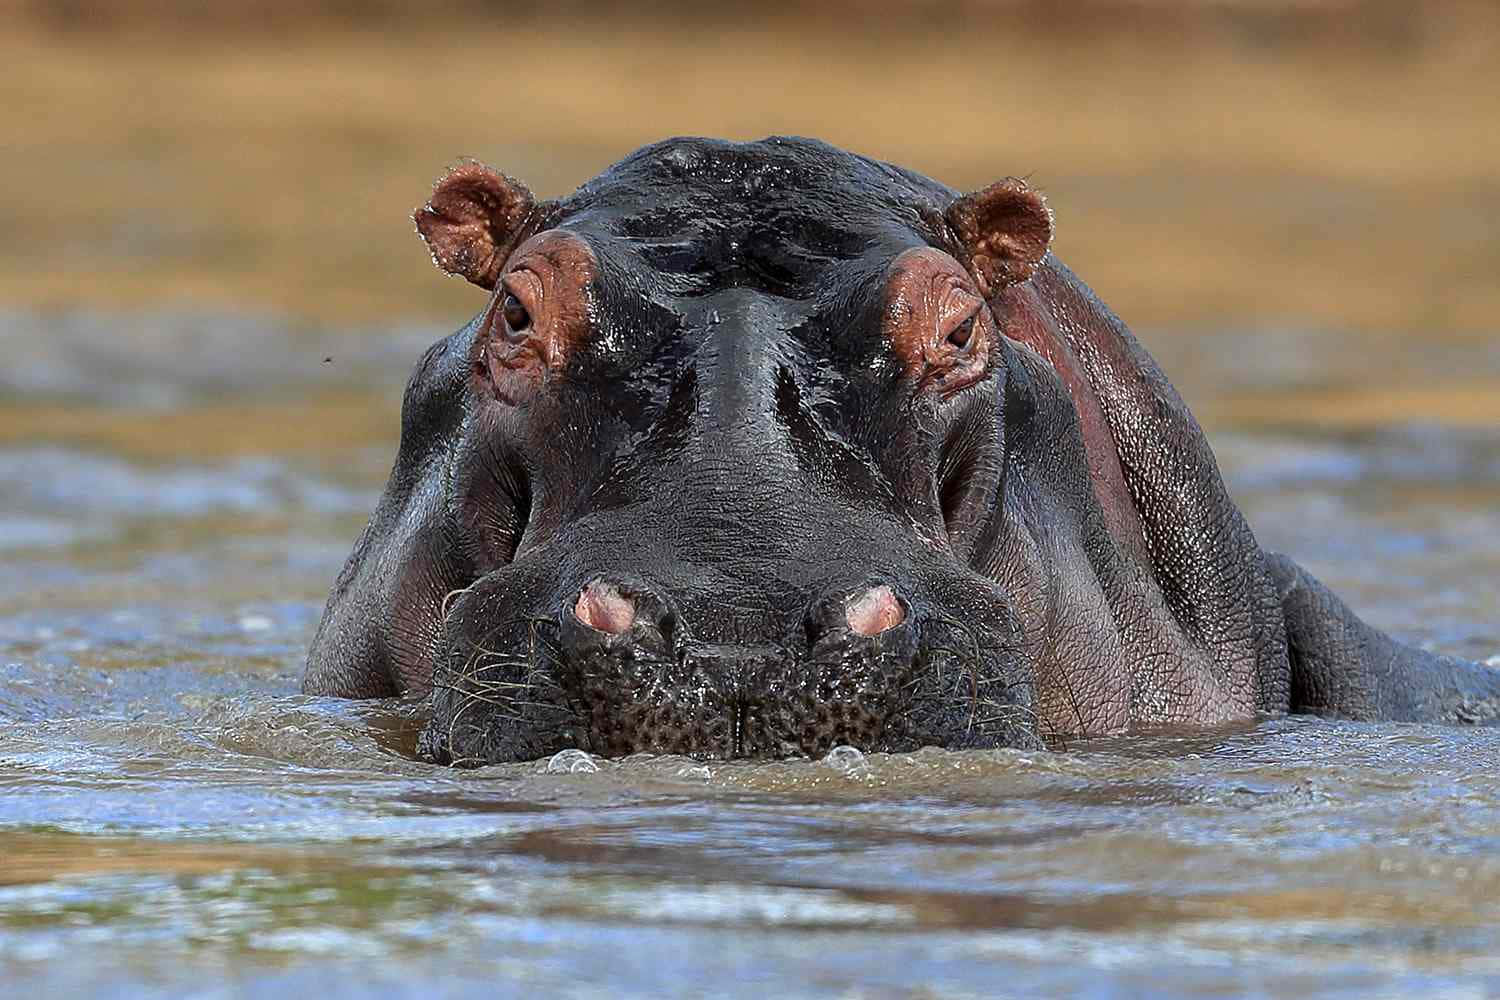 An adorable hippo wading in the river